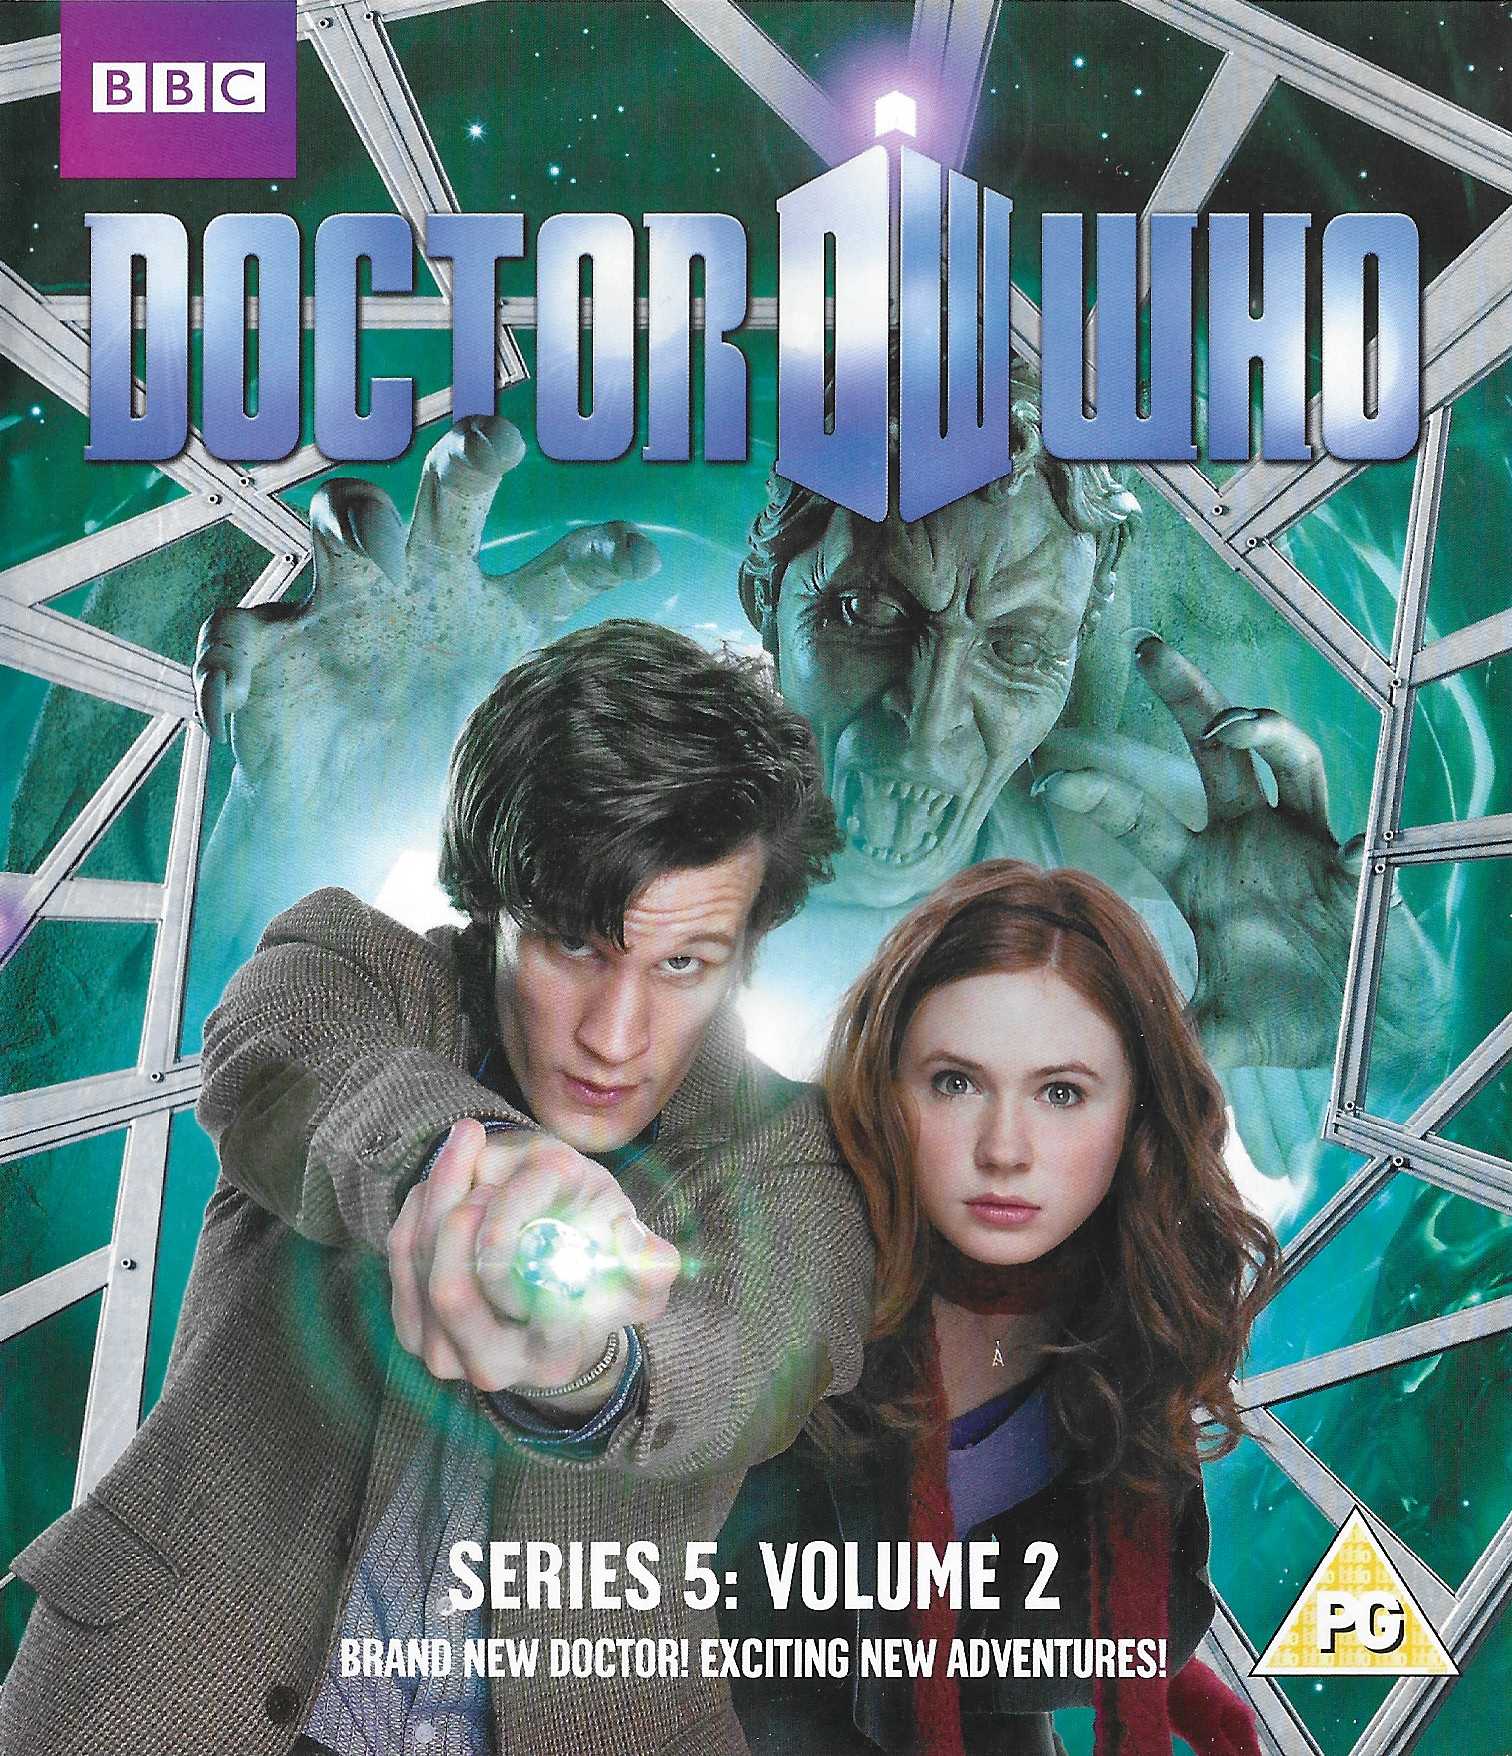 Picture of BBCBD 0083 Doctor Who - Series 5, volume 2 by artist Steven Moffat / Toby Whithouse from the BBC records and Tapes library